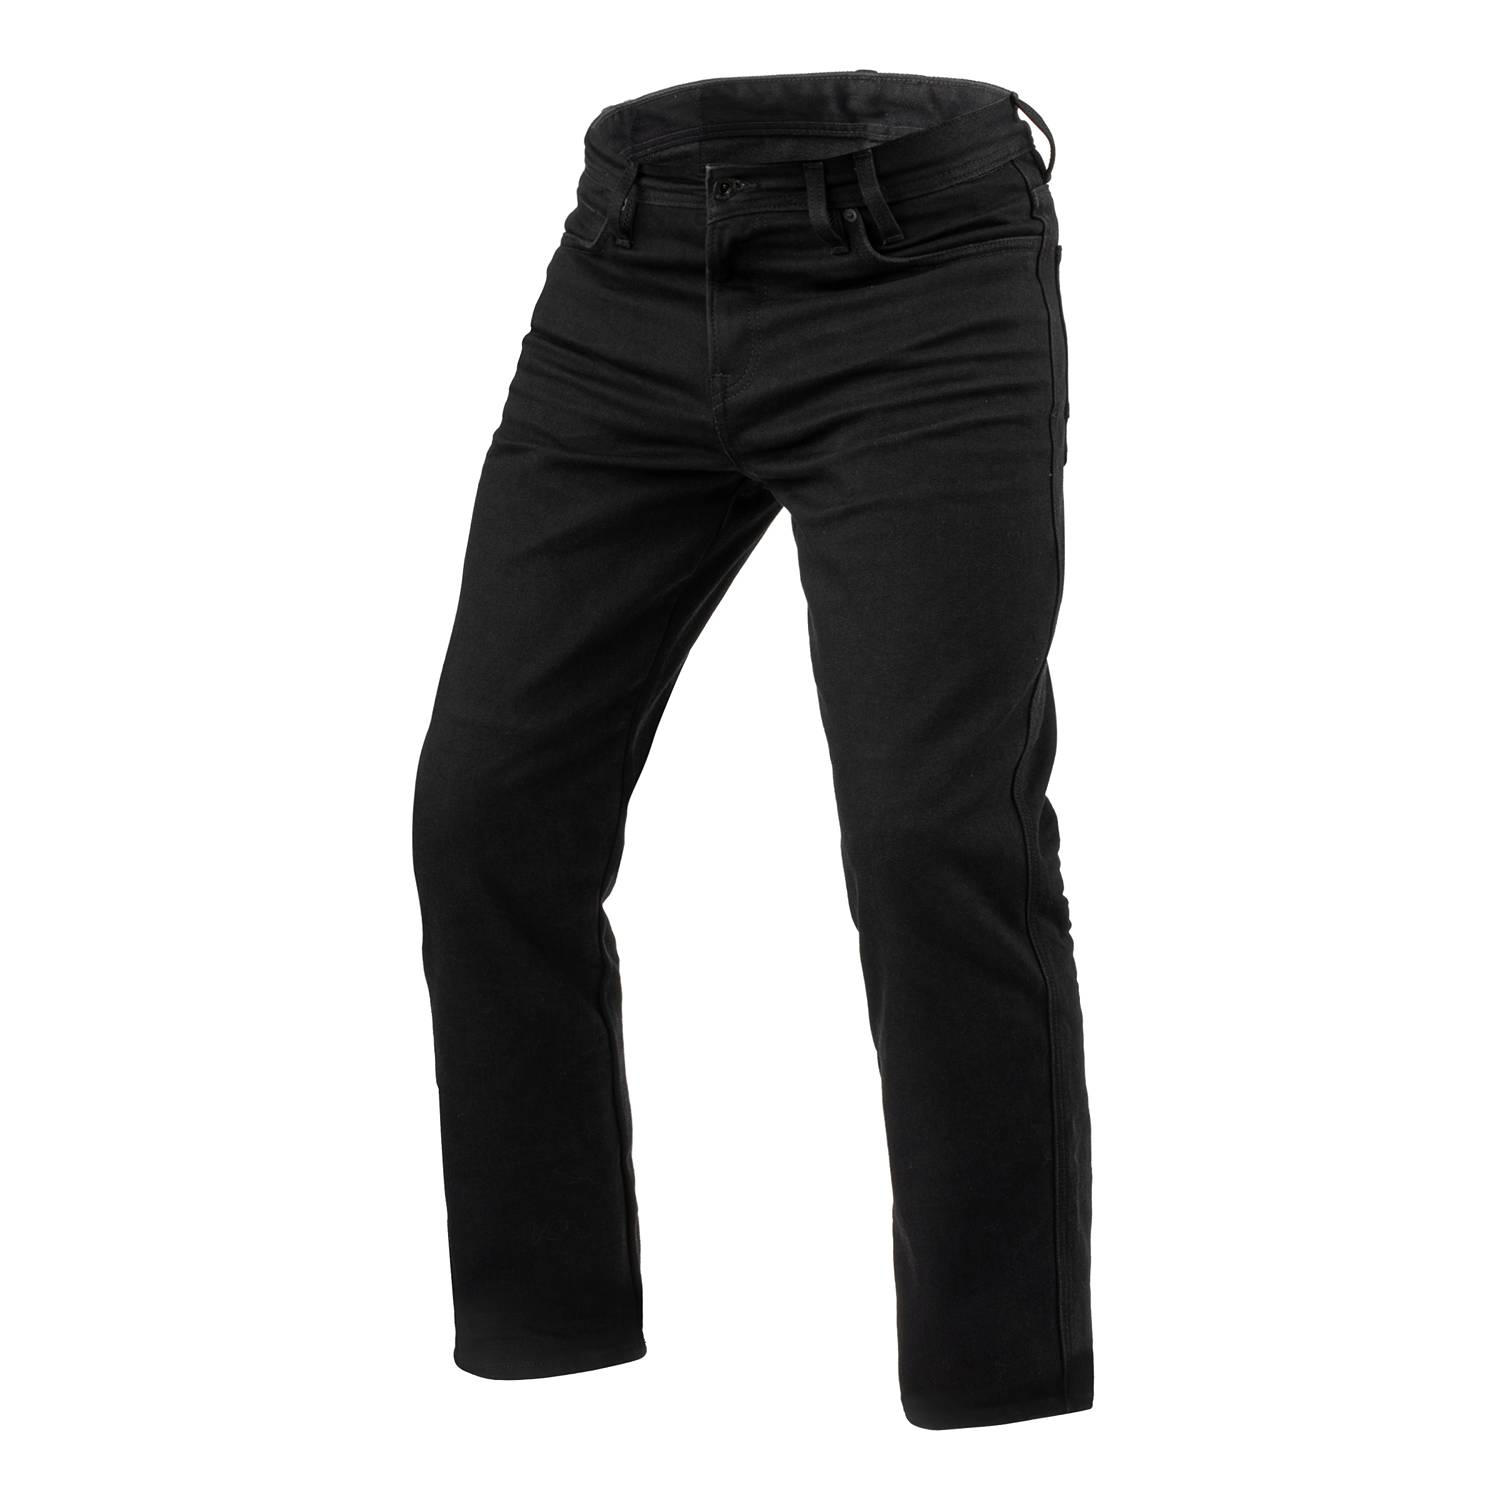 Image of REV'IT! Jeans Lombard 3 RF Black L34 Motorcycle Jeans Taille L34/W31